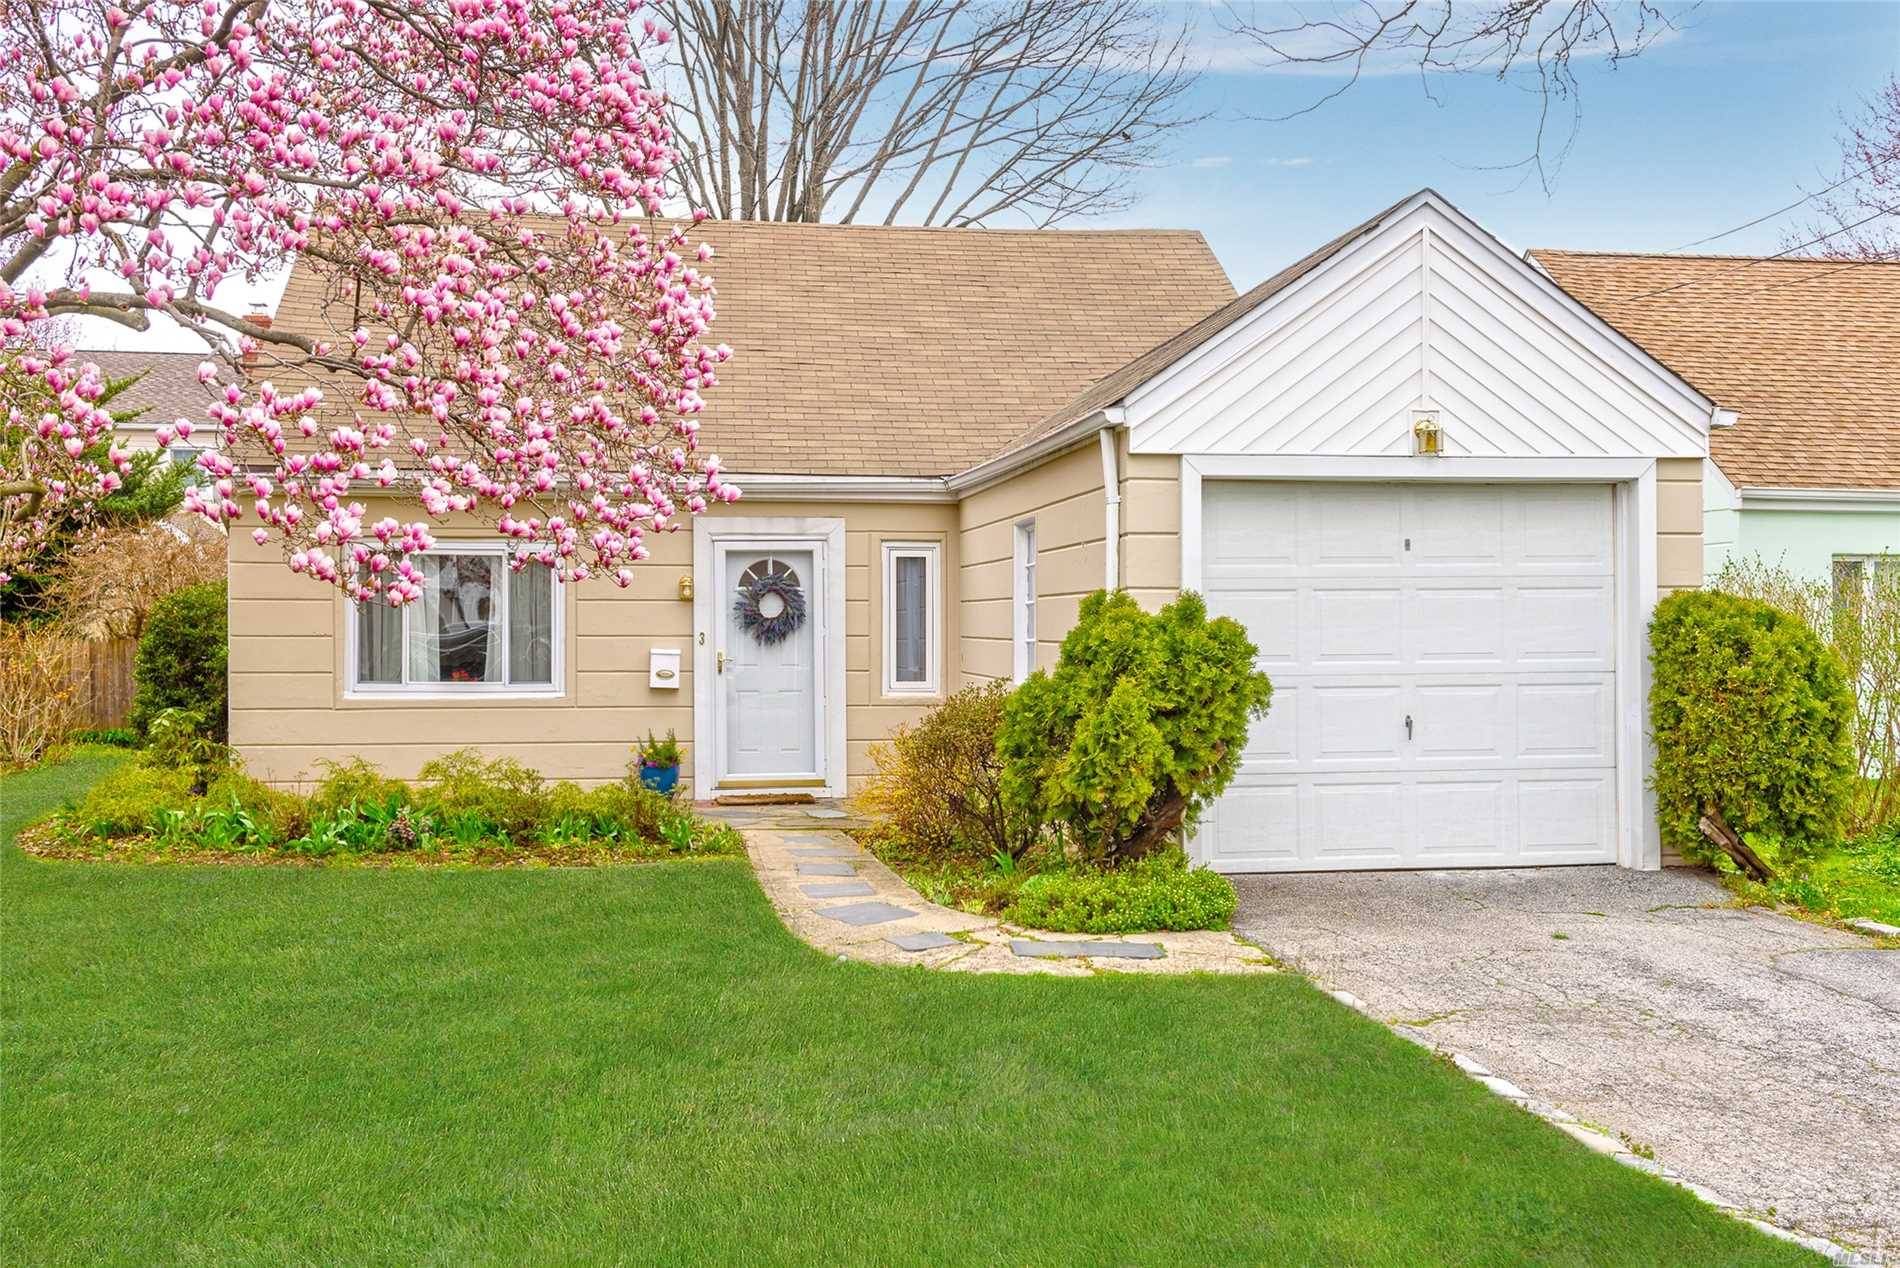 Charming four bedroom two bath cape in the heart of Manhasset Isle.